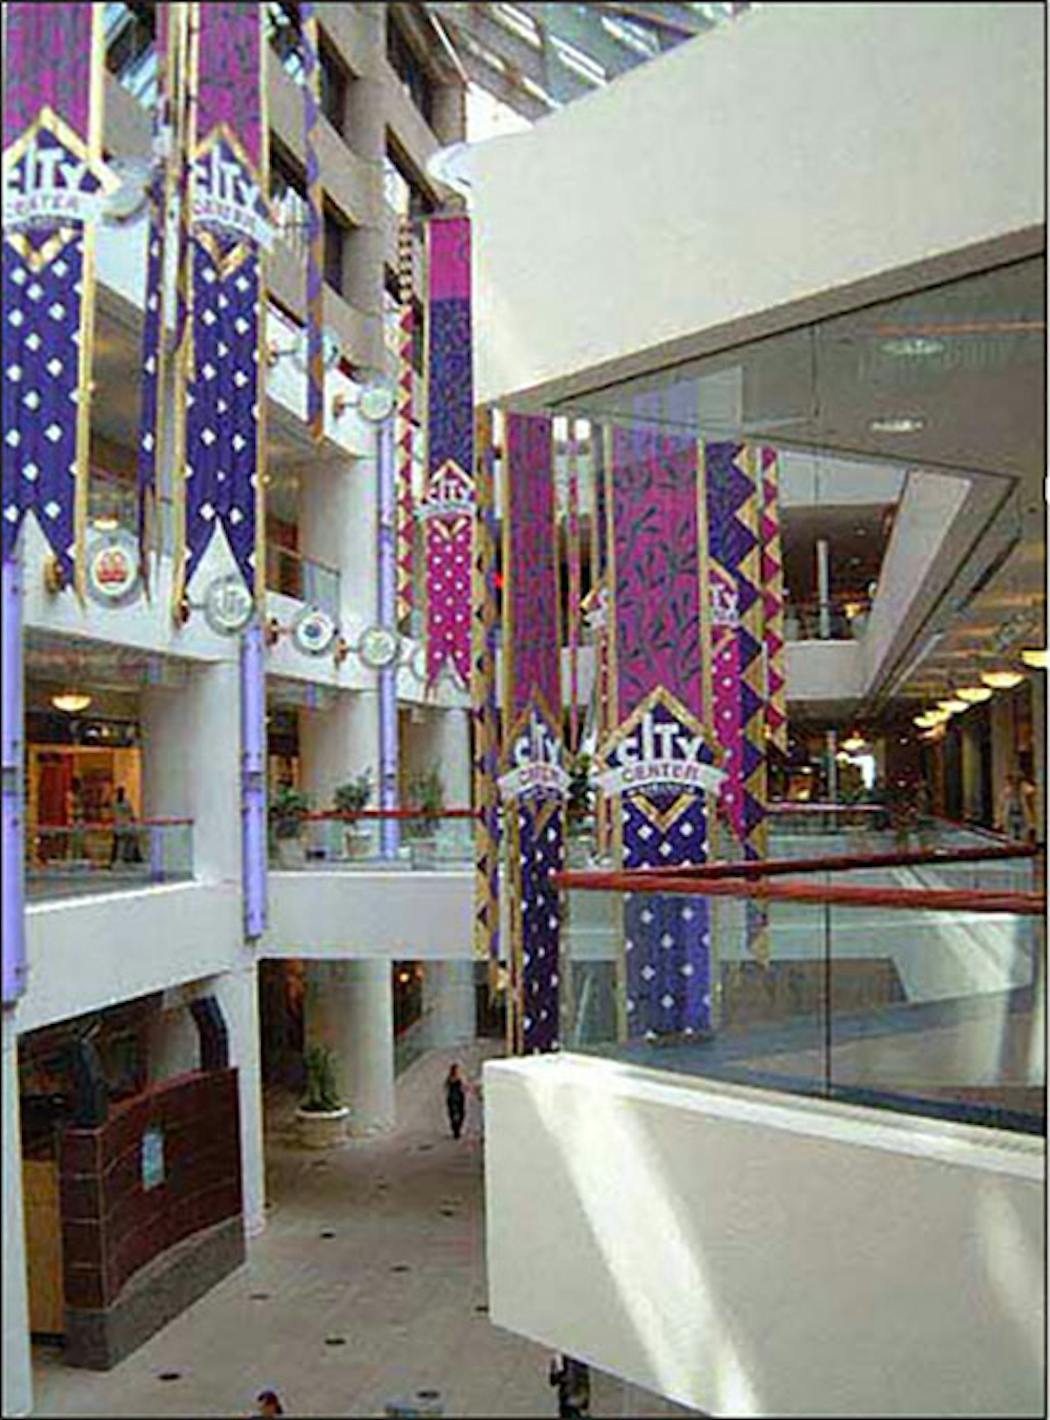 City Center in the 2000s,  decked out in some desperately garish banners. It doesn’t have to look like this to get people back, but some color would be nice. 